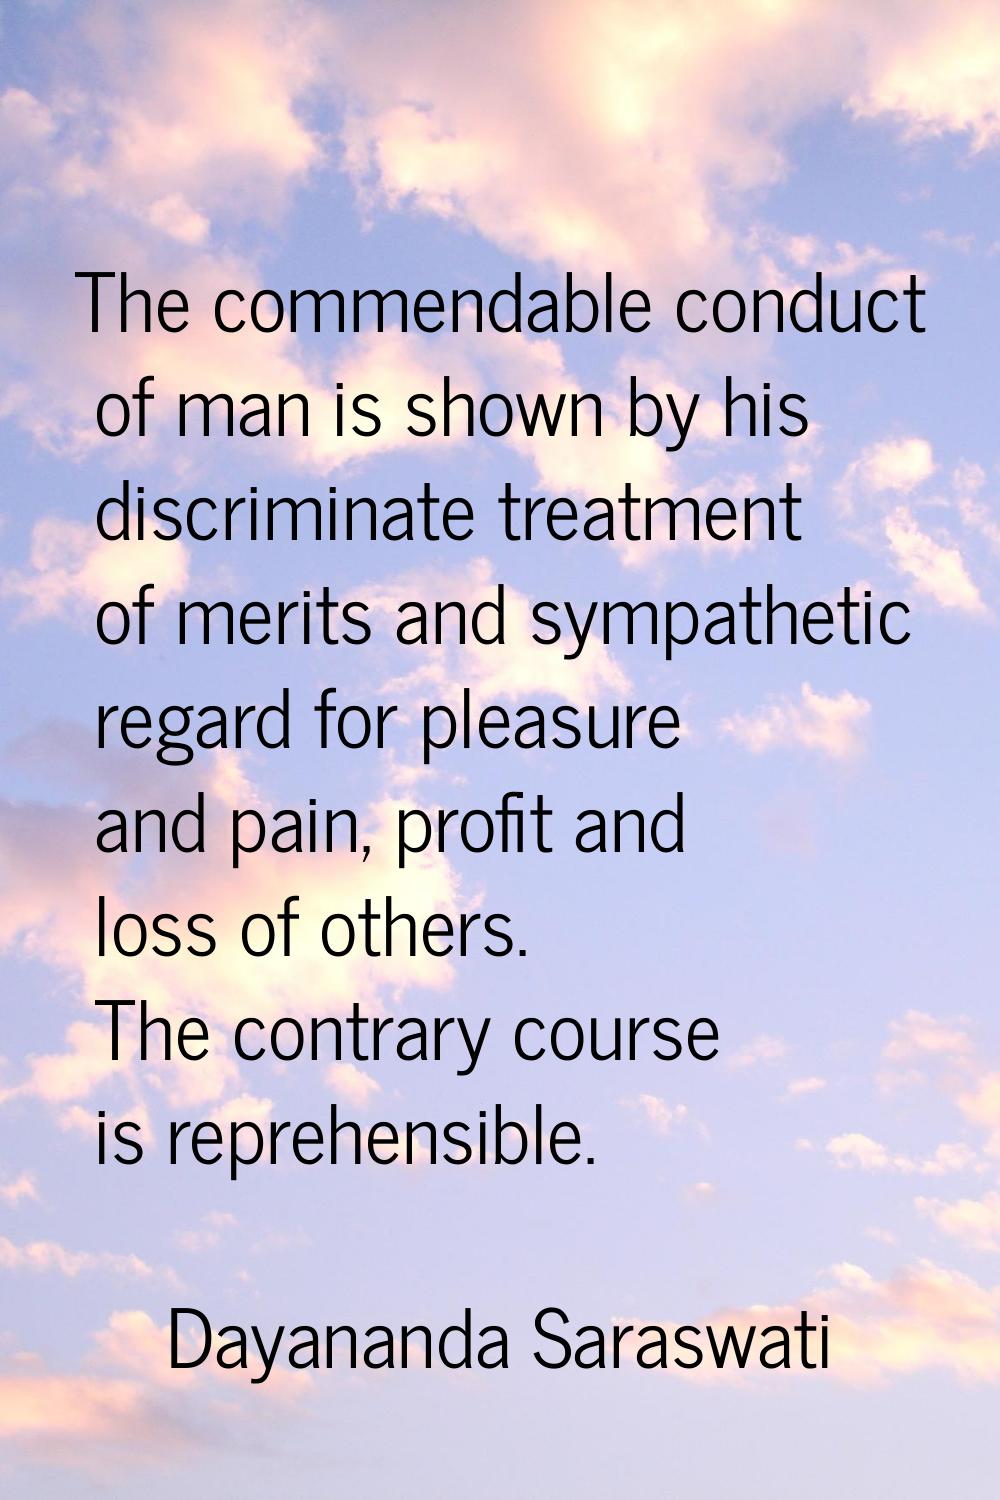 The commendable conduct of man is shown by his discriminate treatment of merits and sympathetic reg